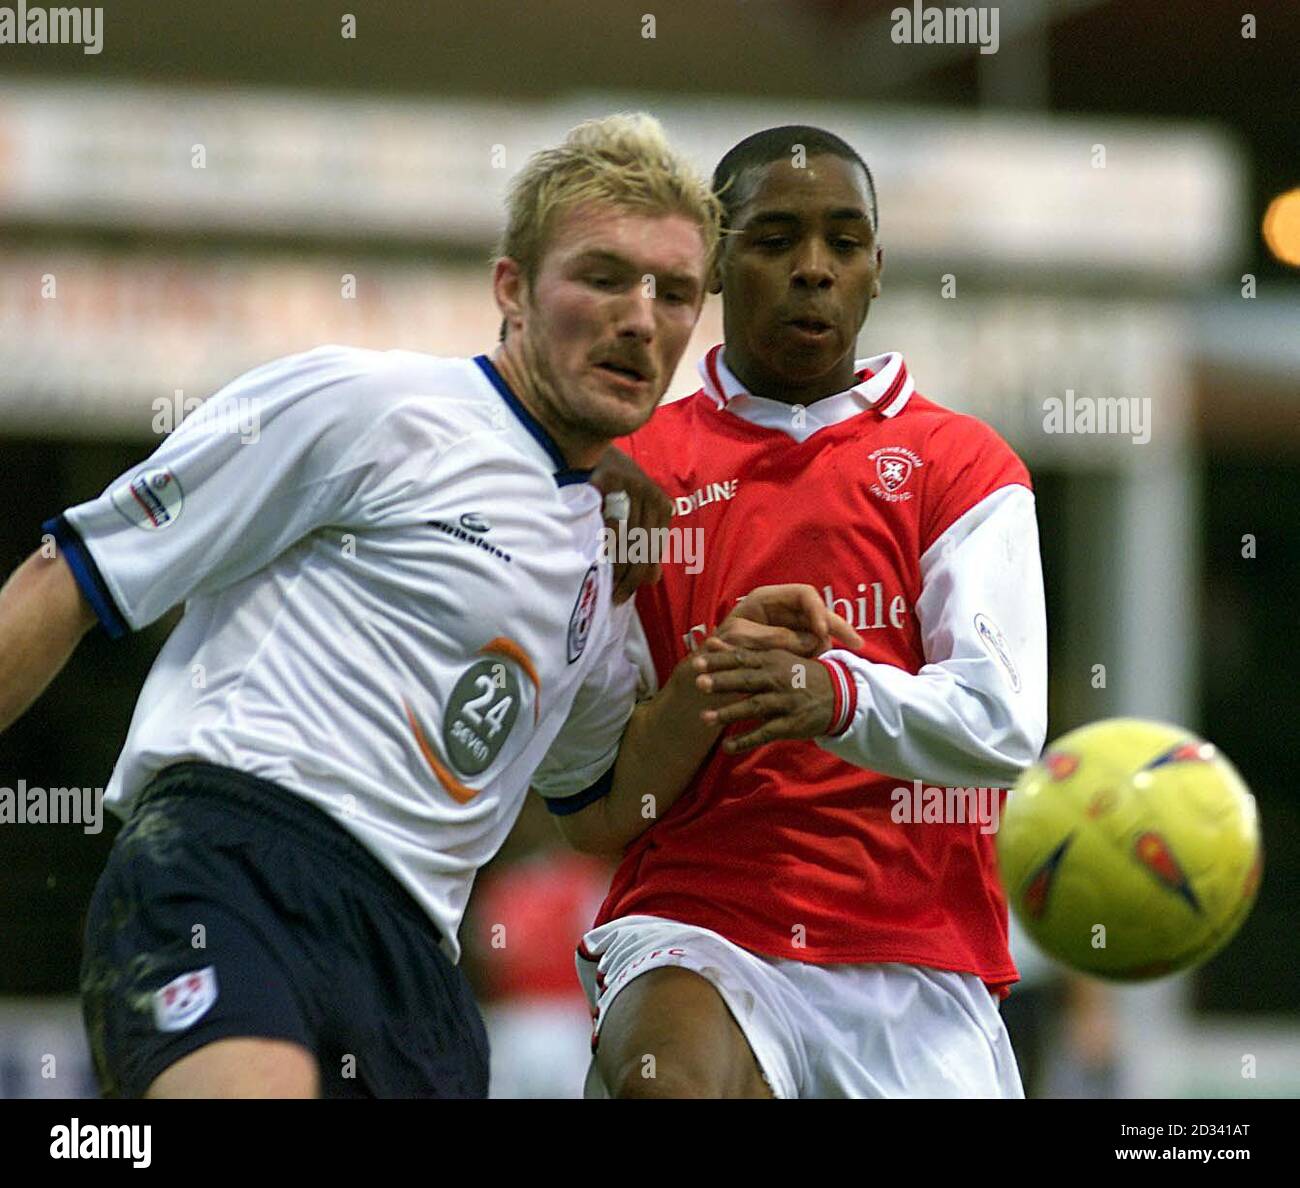 Millwall's Darren Ward (left) in action against Rotherham's Darren Byfield during their Nationwide Division One match at Rotherham's Millmoor ground. THIS PICTURE CAN ONLY BE USED WITHIN THE CONTEXT OF AN EDITORIAL FEATURE. NO UNOFFICIAL CLUB WEBSITE USE. Stock Photo